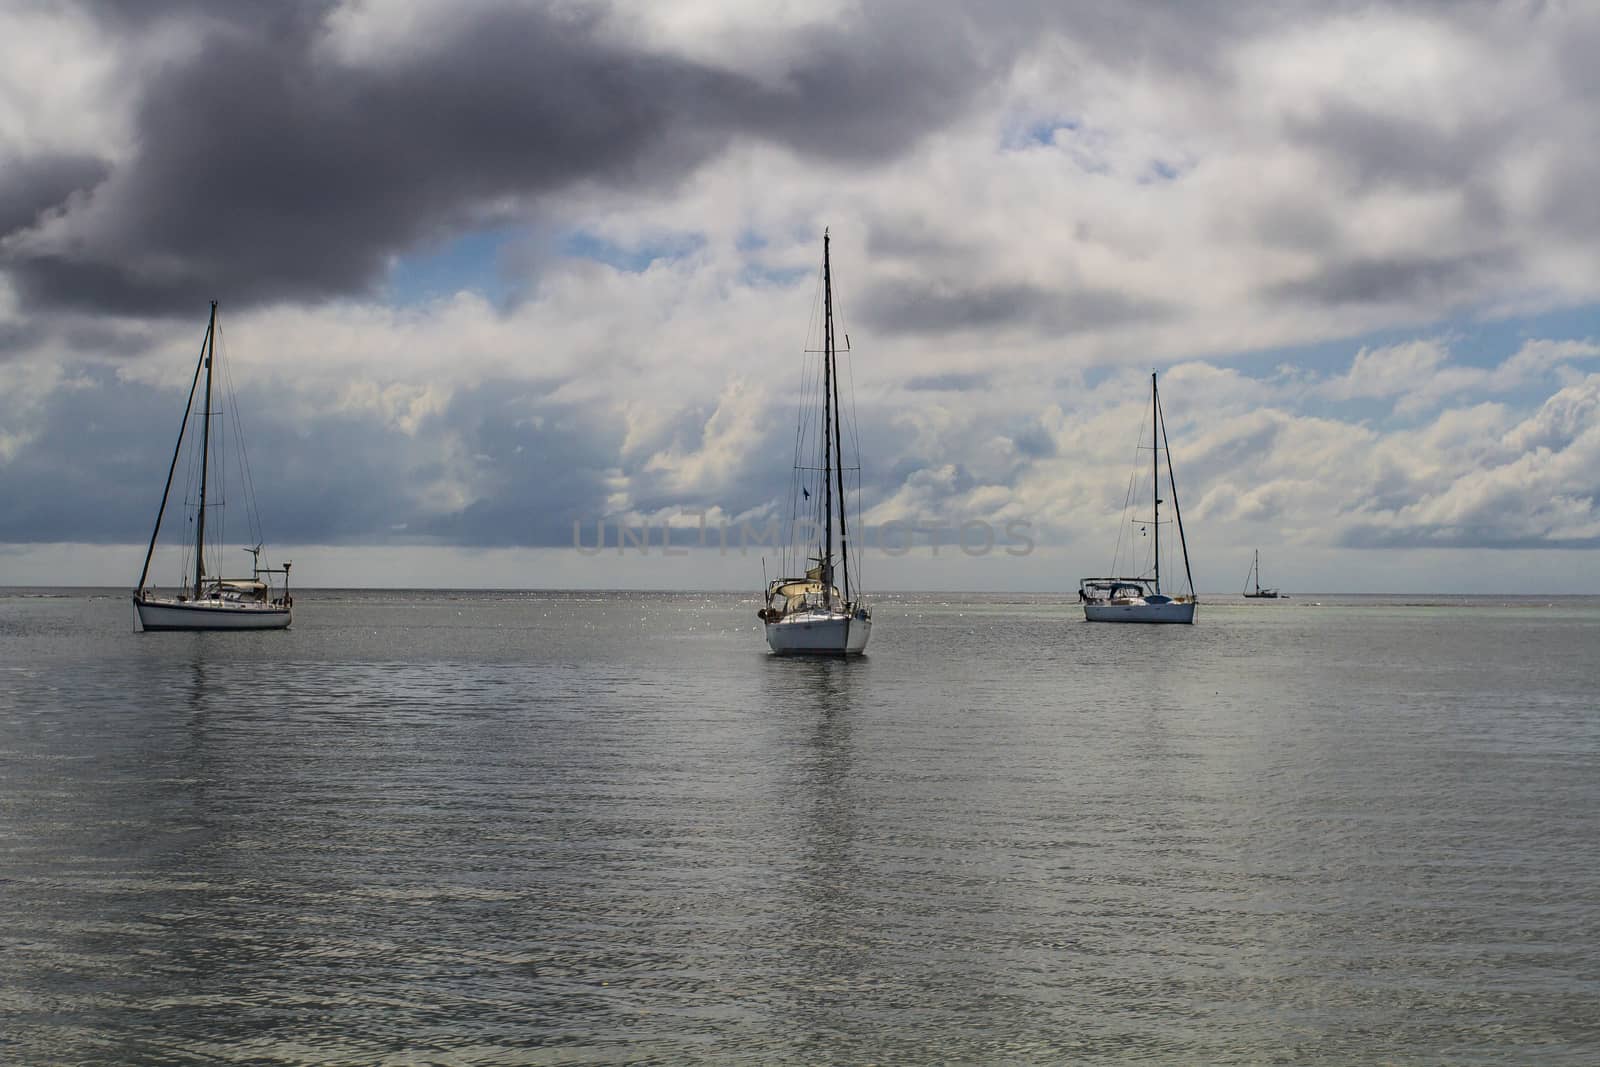 three sail boat on the ocean during a cloudy day